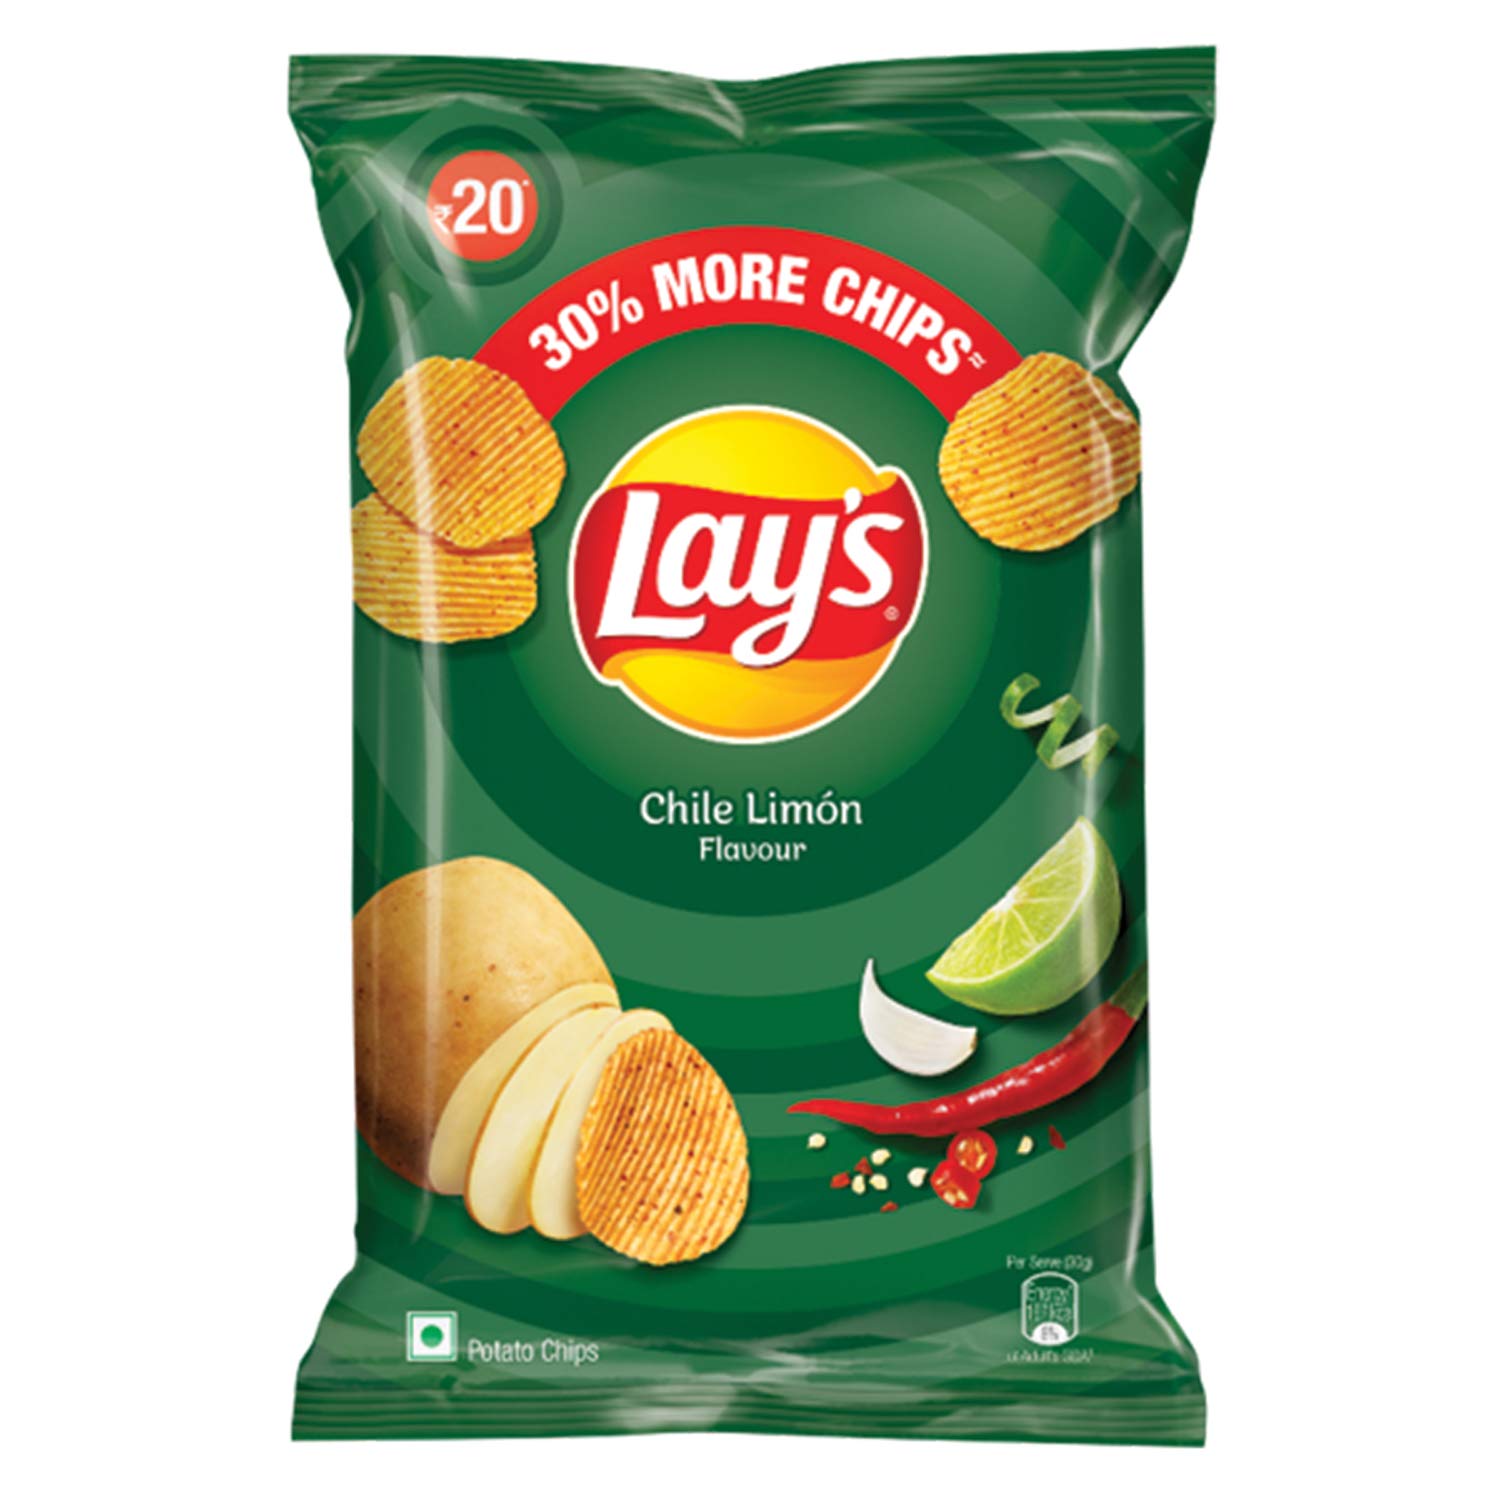 Lays Chile Limon (Pack of 5*52gm)